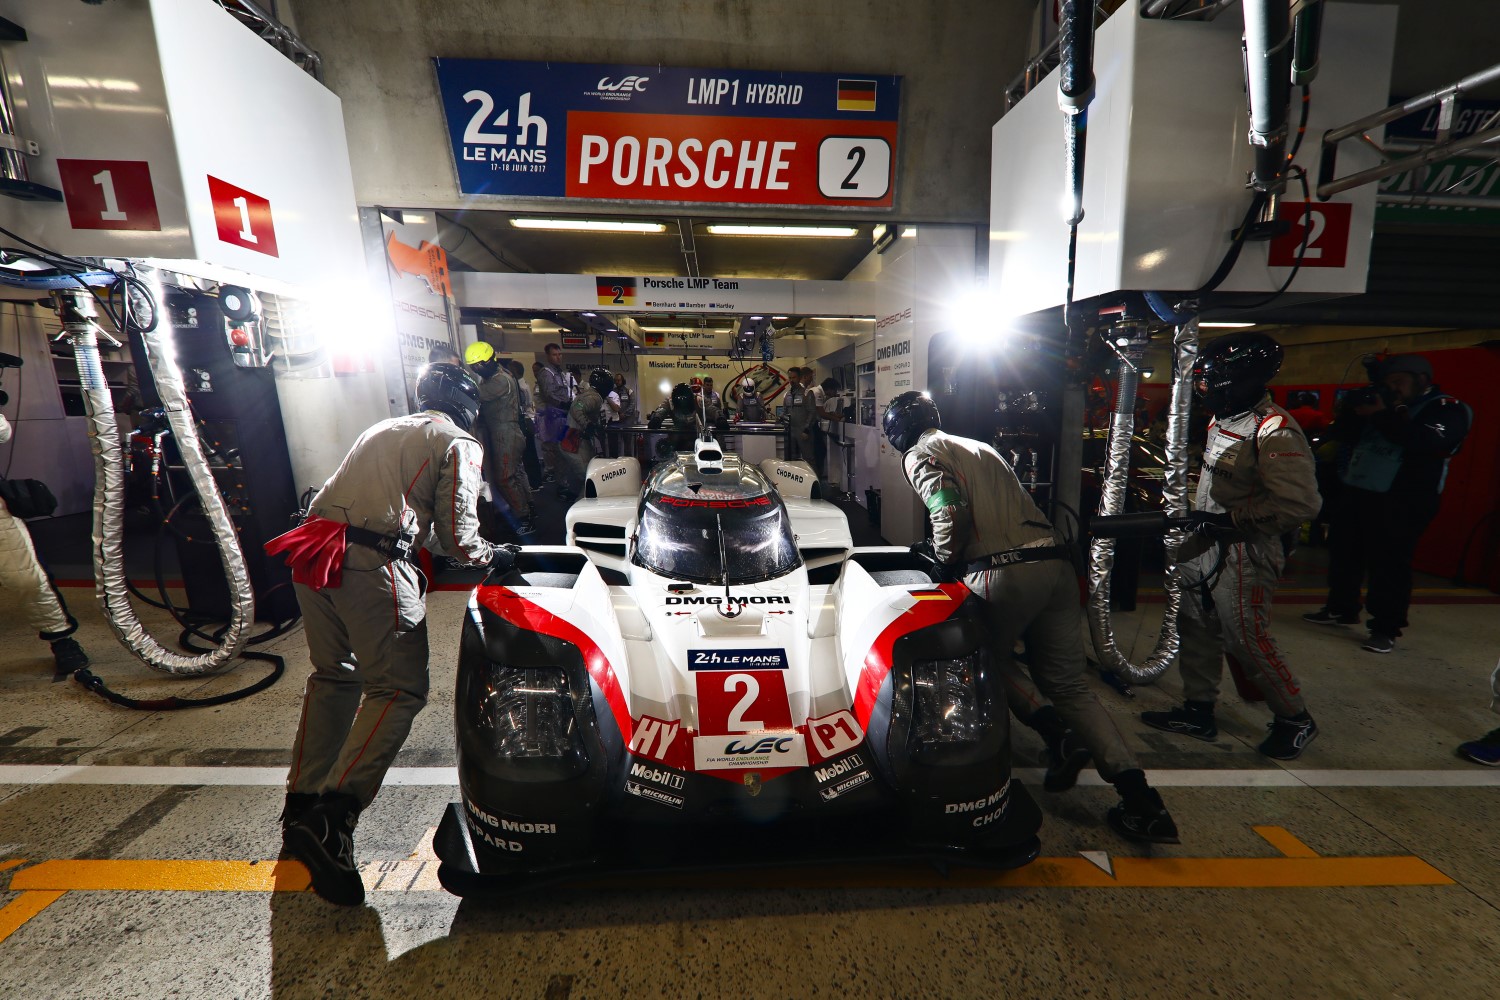 First Audi and now Porsche. The WEC is faced with a lot of money walking out of the paddock